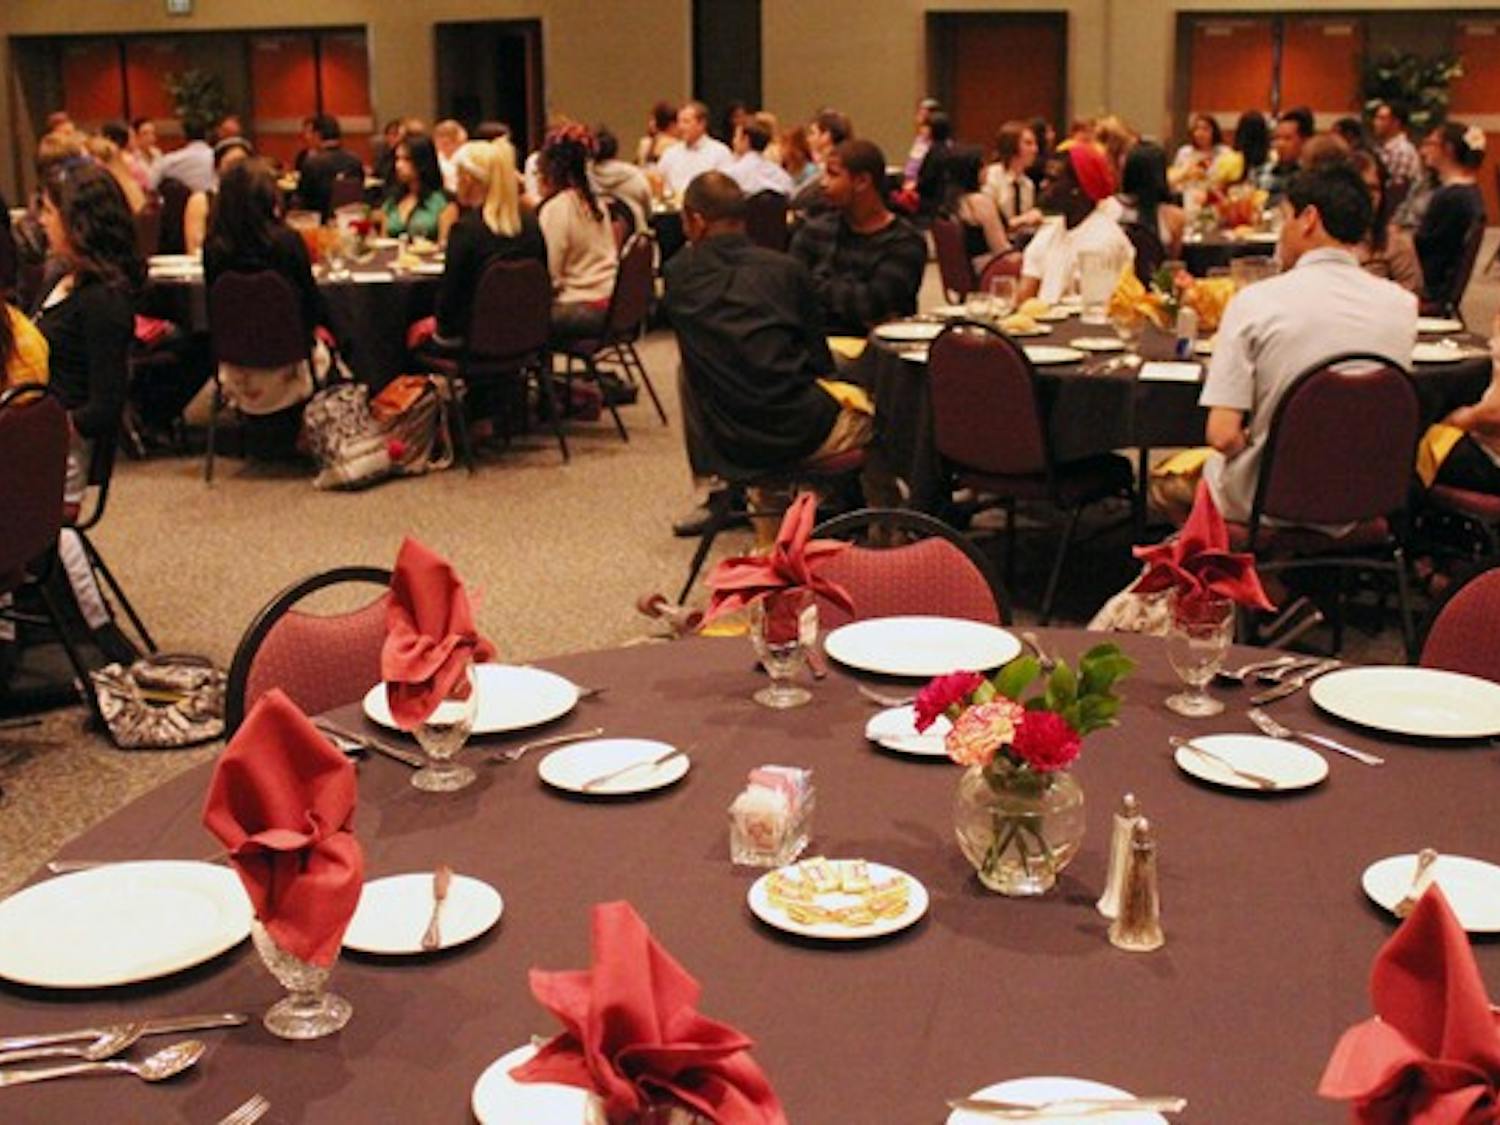 Barrett, The Honors College hosted a free dinner for students on the West campus Wednesday night. While they ate, Carol Bory gave guidance on proper etiquette during business meals. (Photo by Jenn Allen)